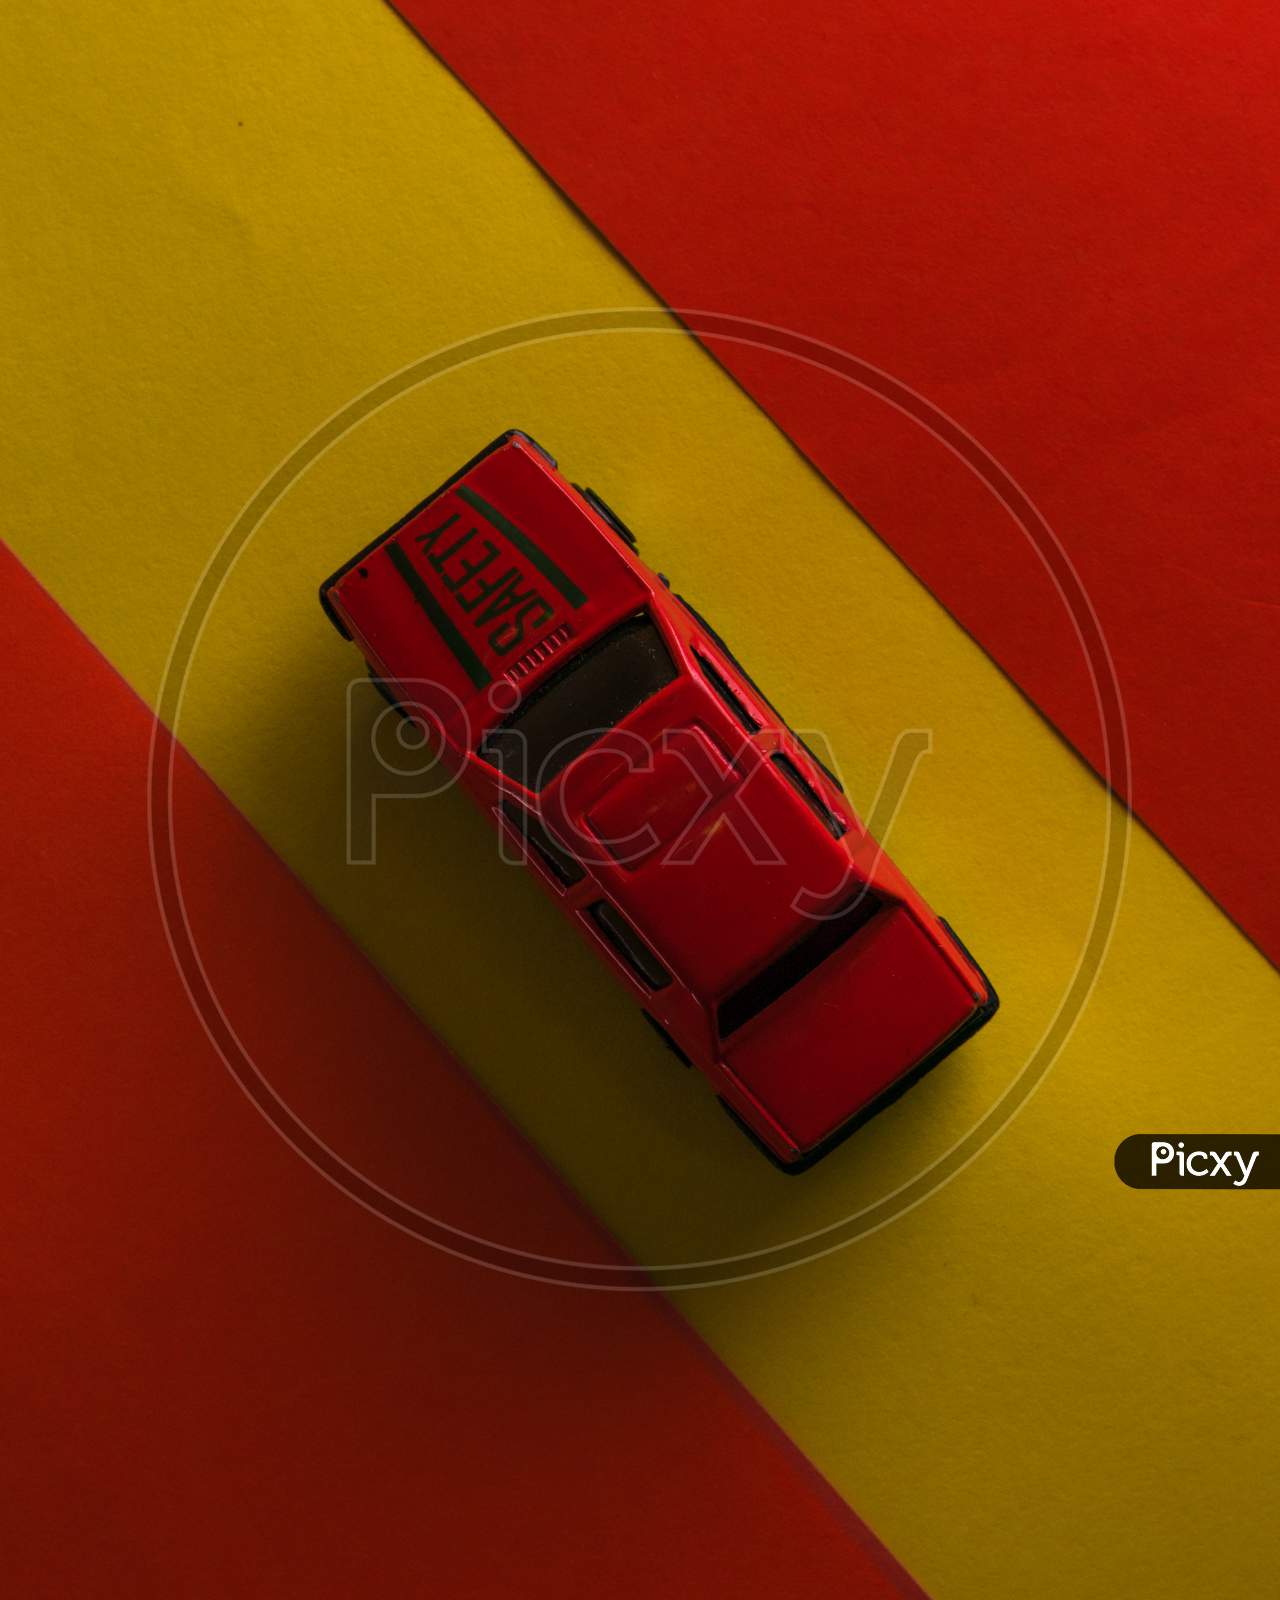 A red toy car is isolated in yellow background surrounded by red border.